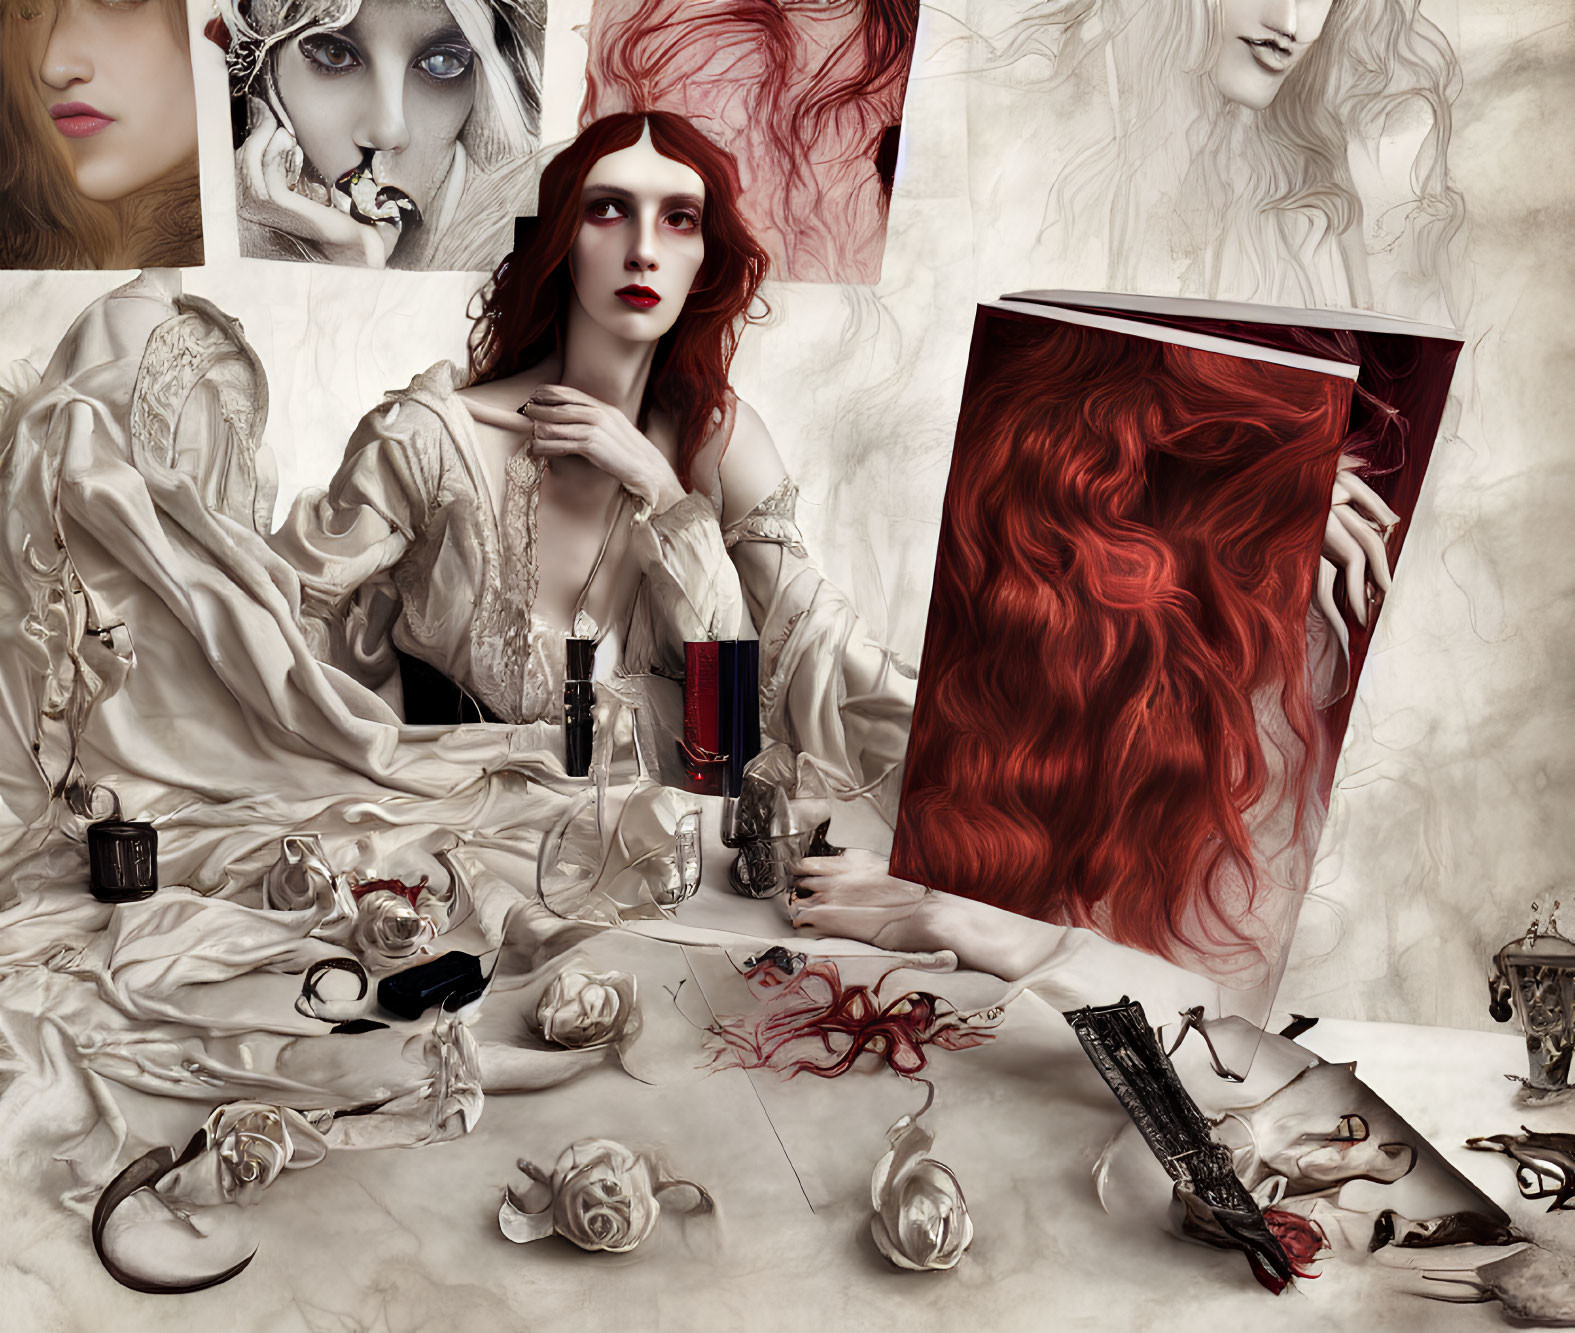 Surreal illustration of woman with red hair and pale skin surrounded by roses, keys, and ornaments